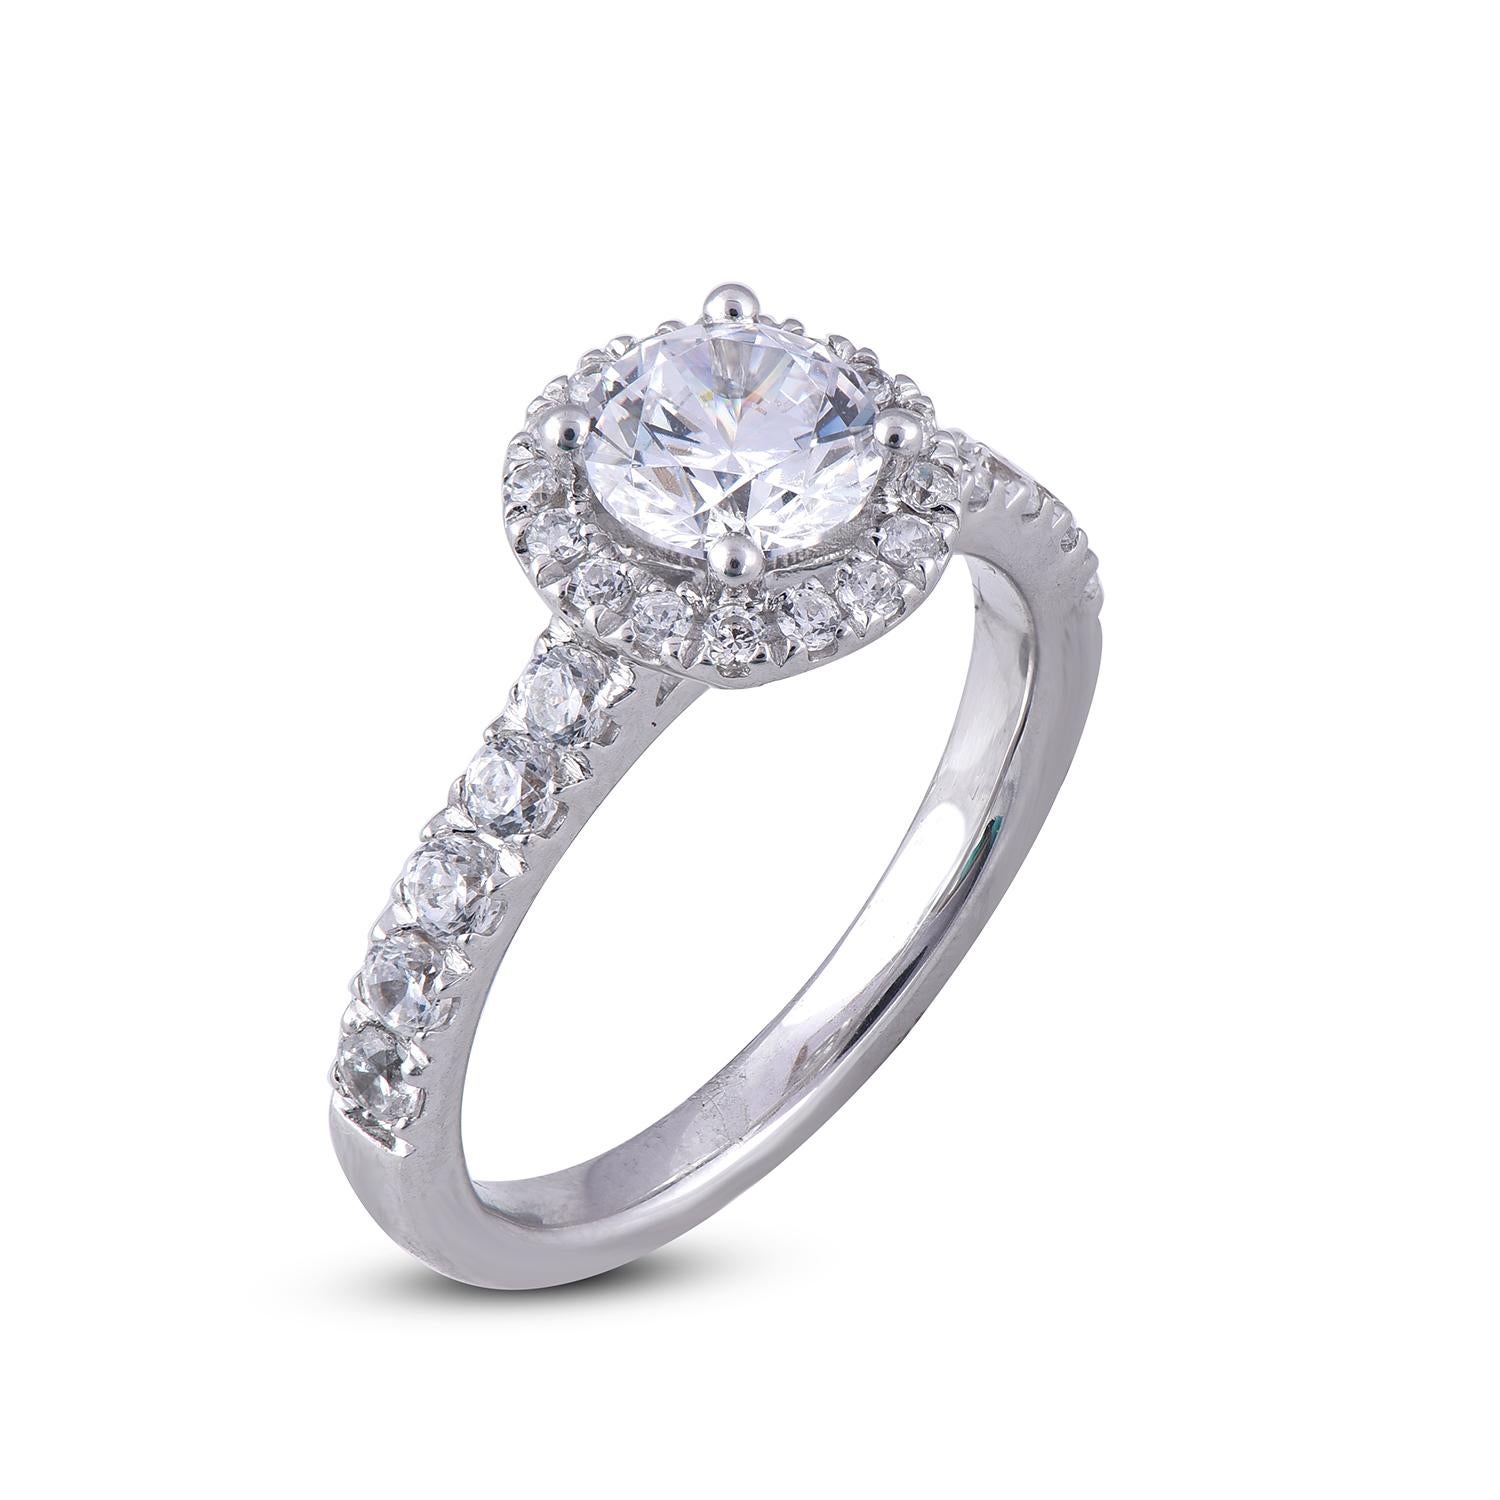 Beautifully studded with 27 natural white diamonds in prong setting and designed in 18 karat white gold with 1.00ct of center stone and 0.70ct of diamonds lined on frame and shank. The diamonds are graded G-H Color and SI1 -2 Clarity.
